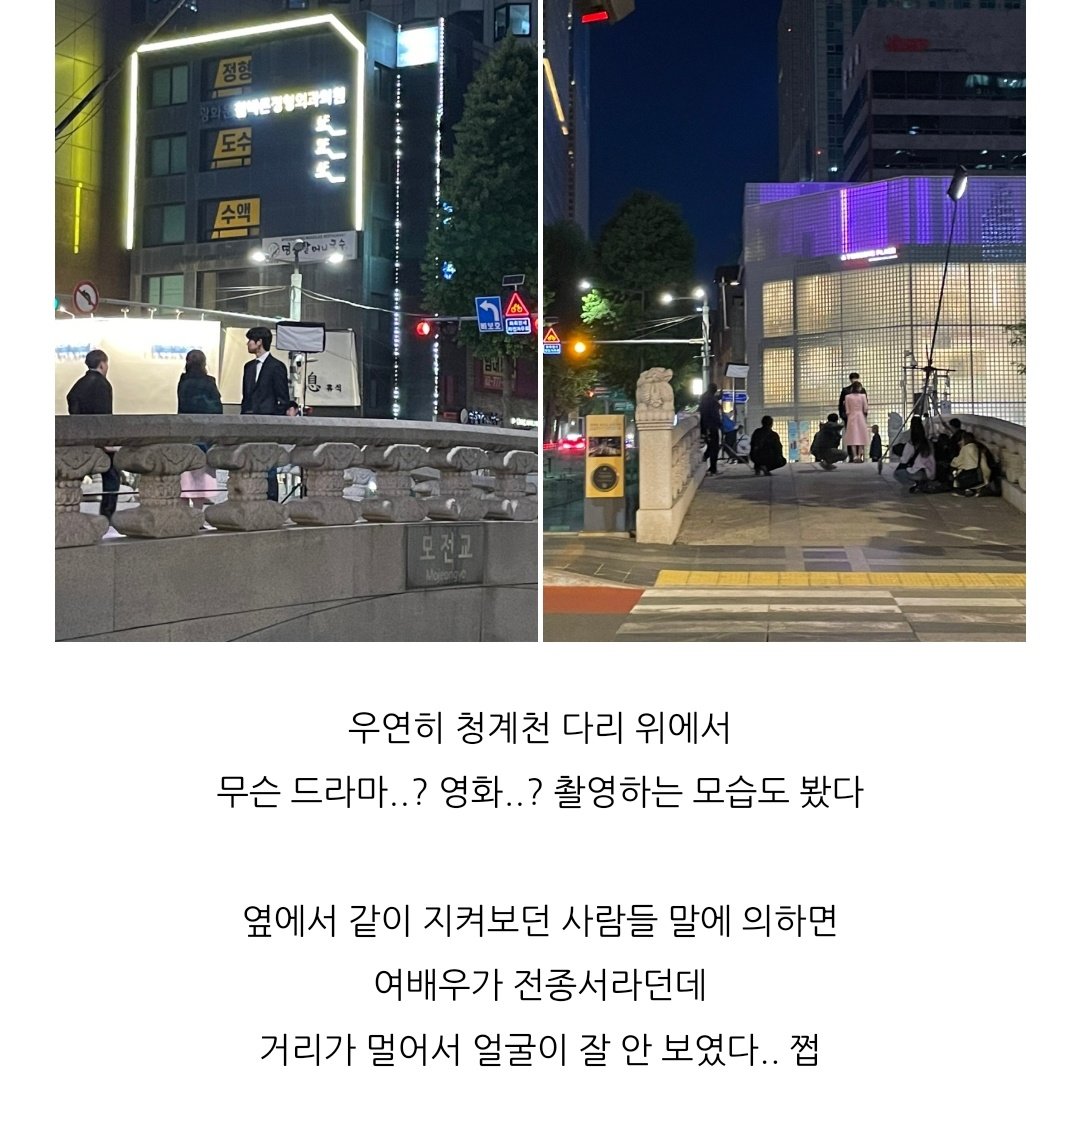 Actor Moon Sangmin and Jeon Jong Seo spotted while shooting wedding impossible 

'Accidentally on the Cheonggyecheon Bridge
what drama..?  movie..?  I also saw them filming
According to the people who watched the shoot with me, the actress is Jeon Jong-seo'